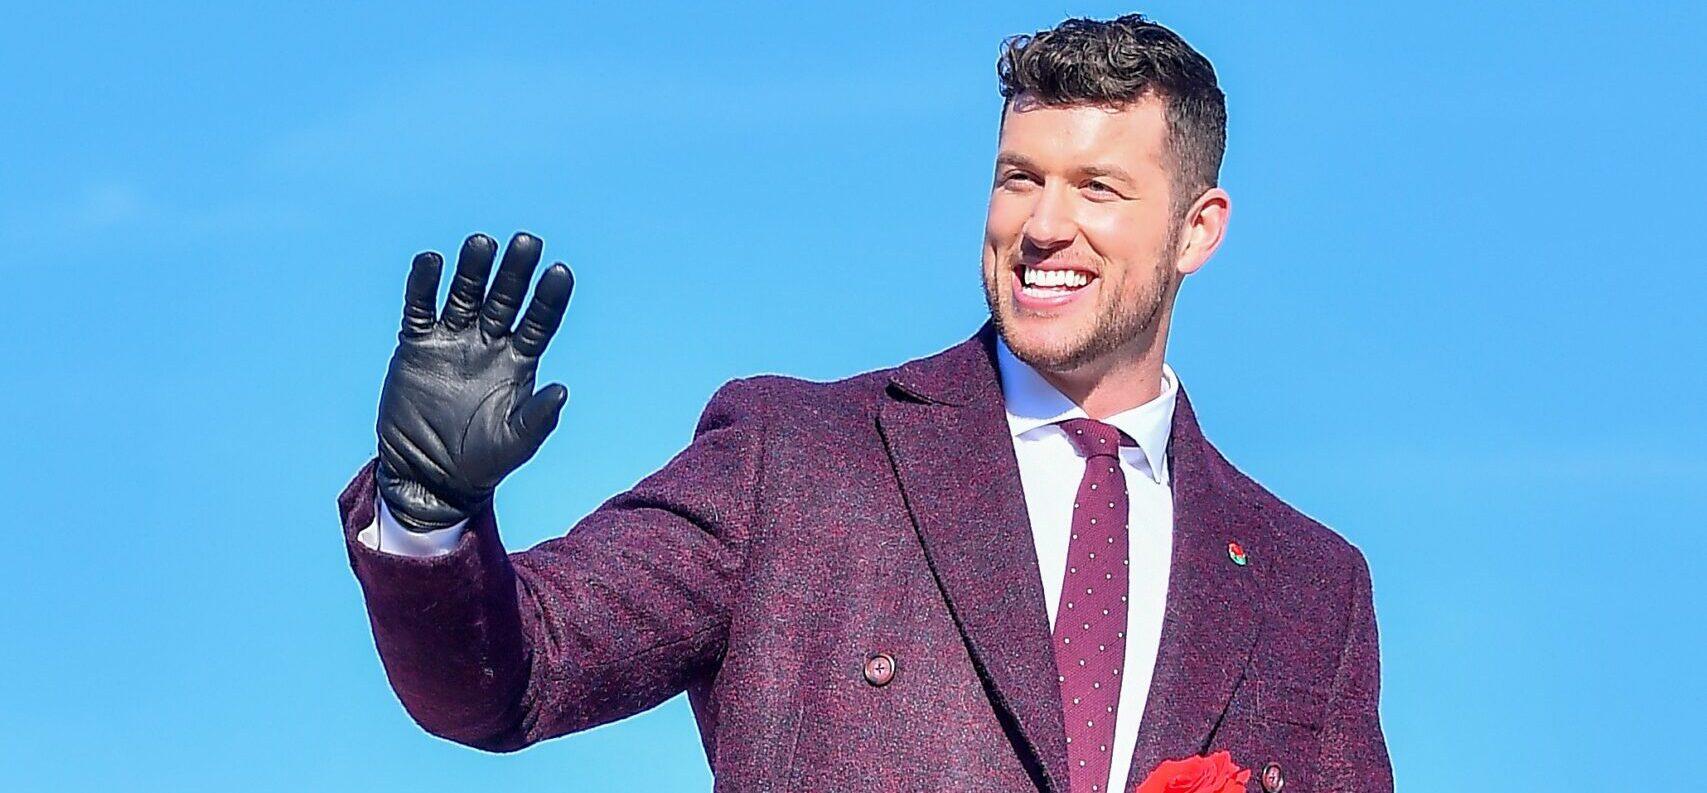 Bachelor Clayton Echard is all smiles while on a parade float in the 2022 Rose Parade in Pasadena Ca